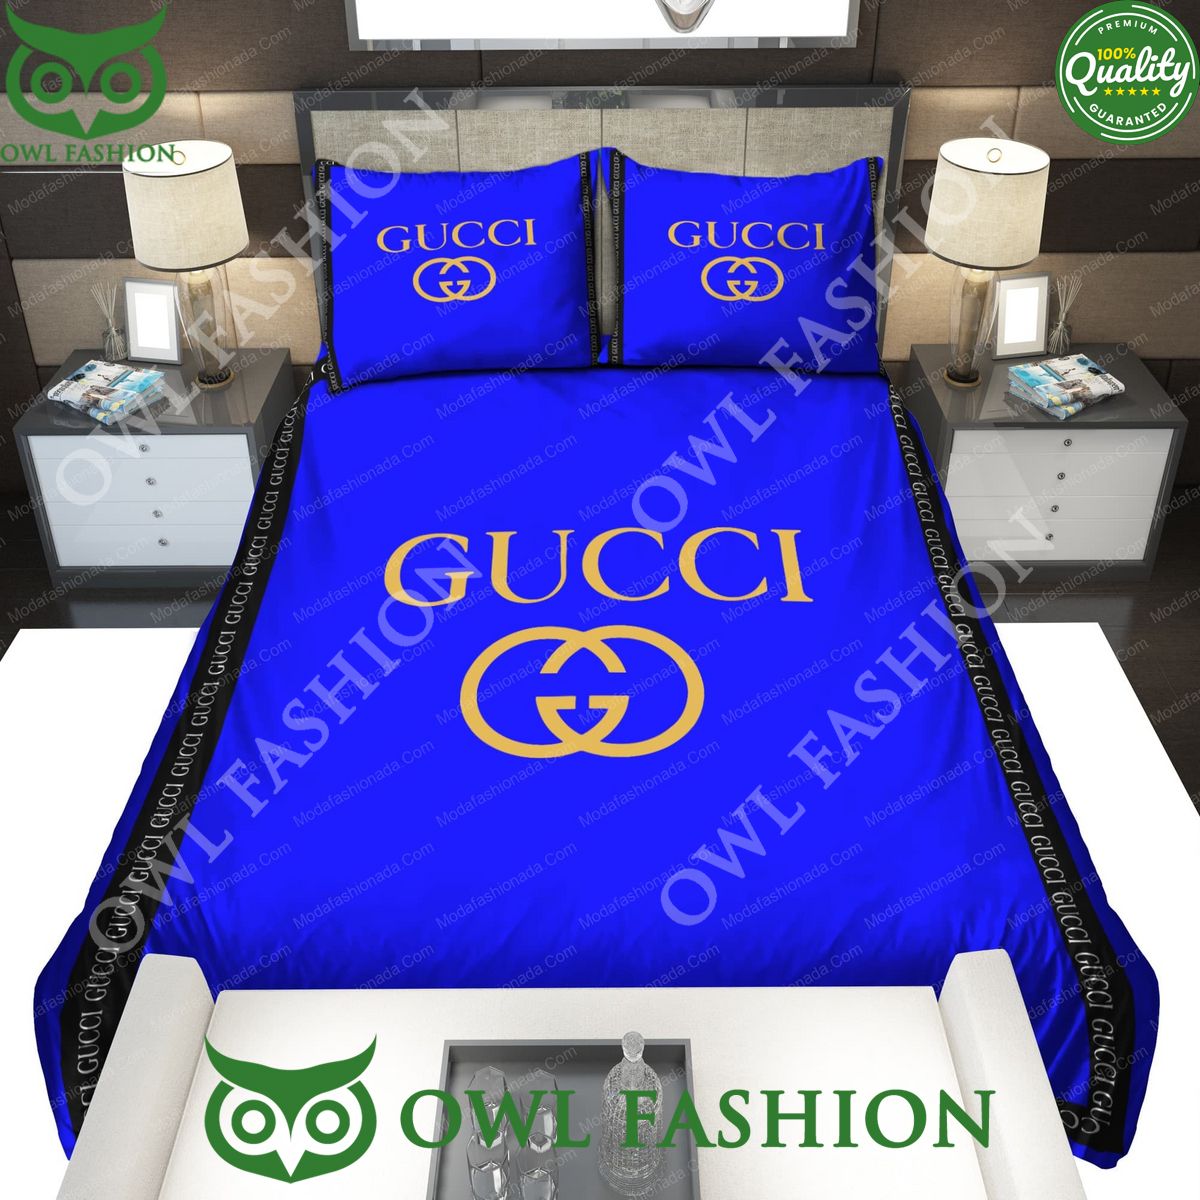 Blue Gucci Bedding Sets Oh! You make me reminded of college days